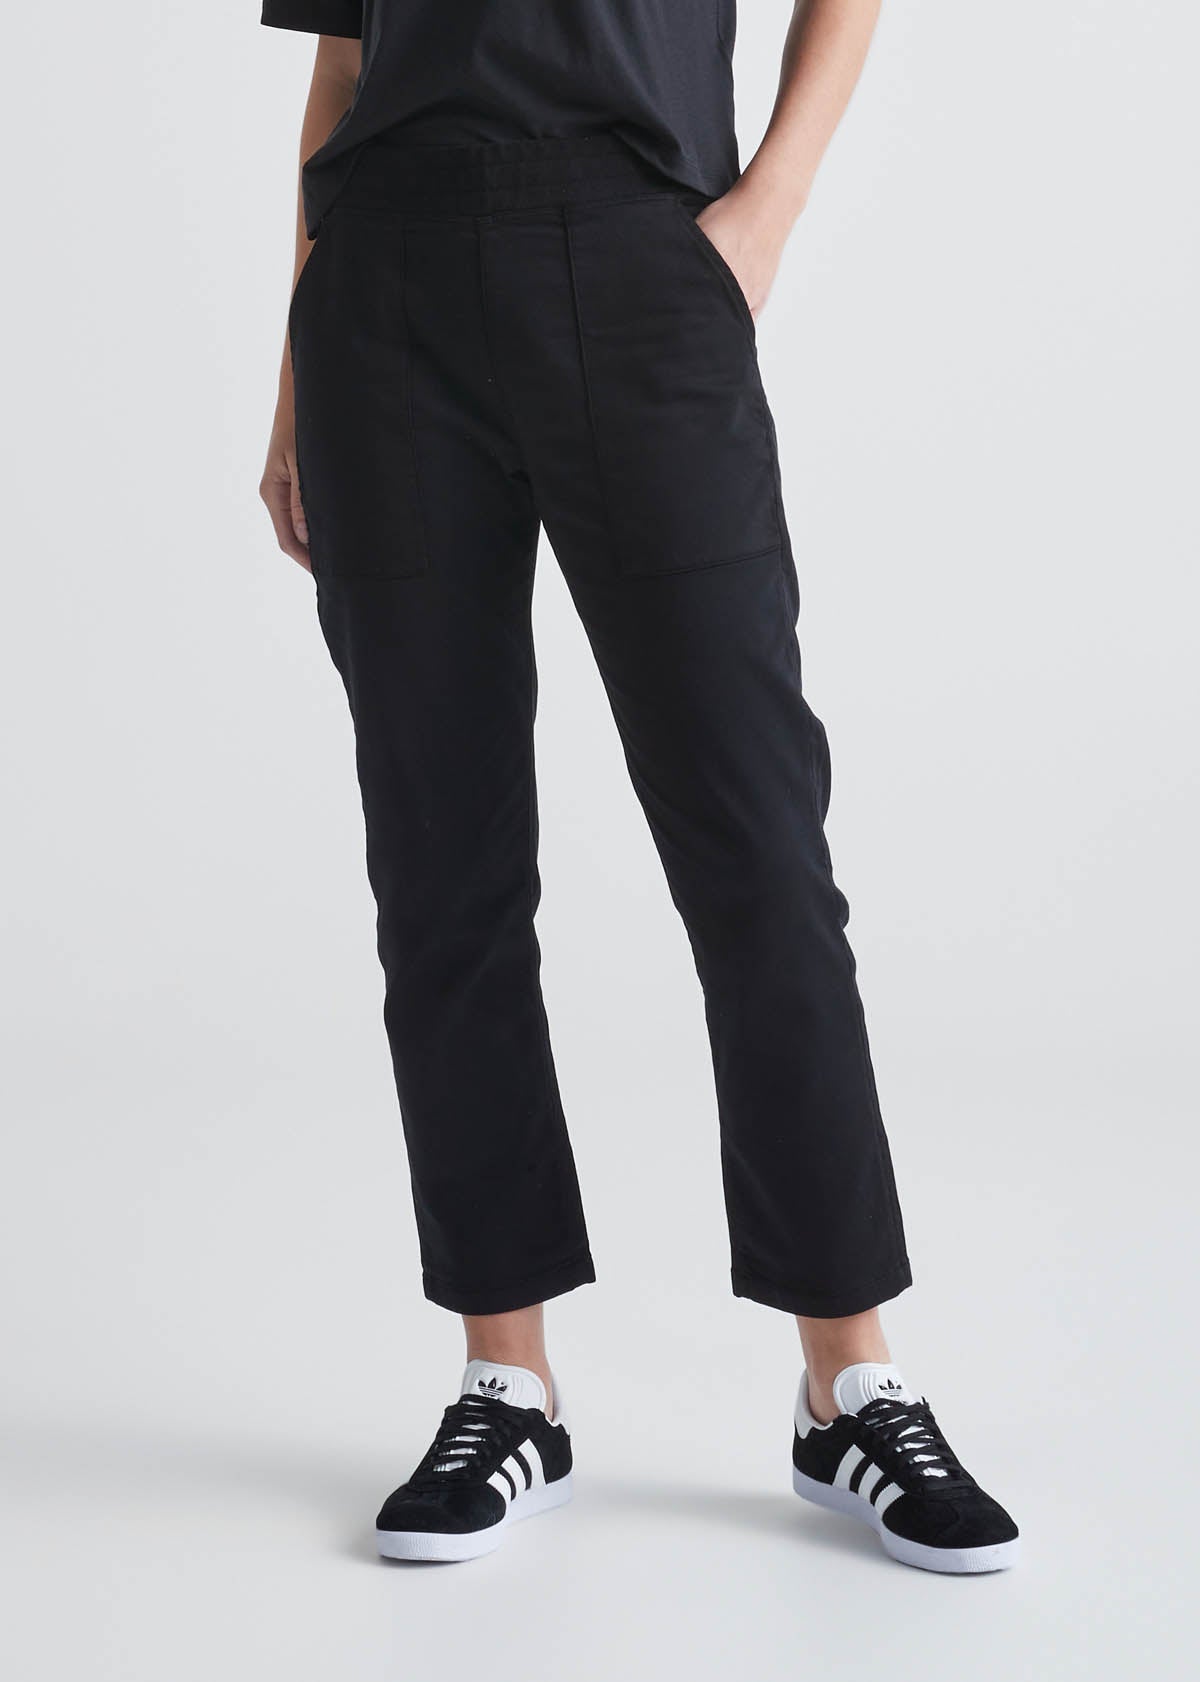 Cropped sweat pants with 30% discount!